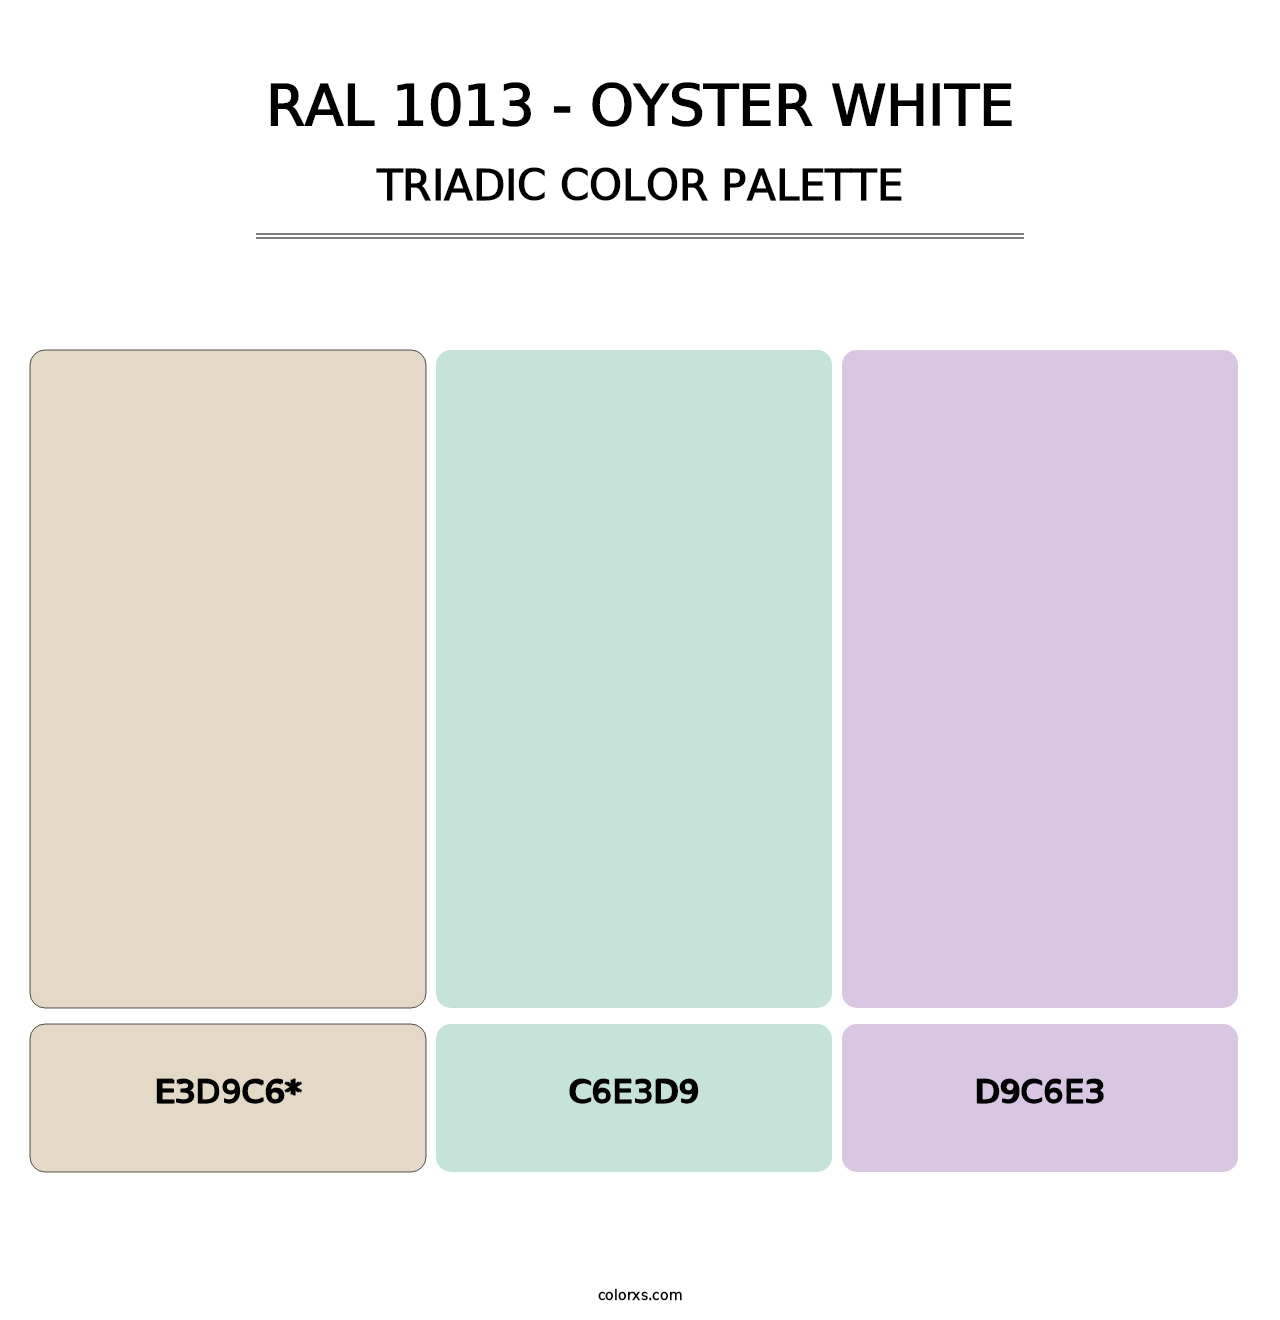 RAL 1013 - Oyster White - Triadic Color Palette